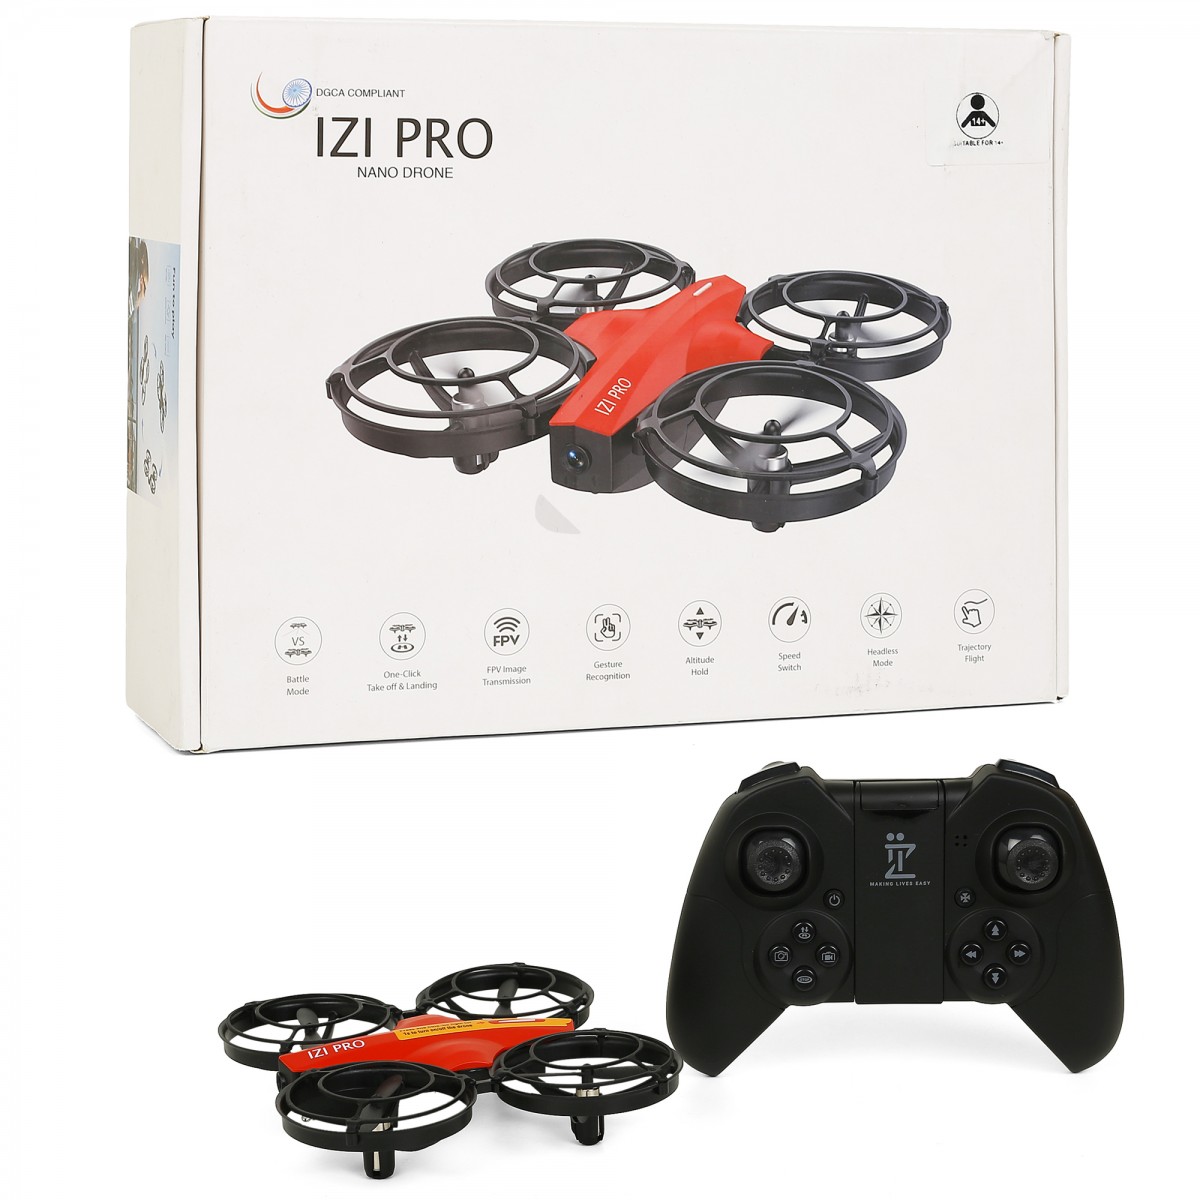 IZI PRO Nano Drone 720P HD Camera 2 Batteries with Battle Mode, One-Key Start, Altitude Hold, 360° Flip, Gesture Control, 10 Minutes Fly Time, Portable Mini RC Drone for Kids & Beginners, Kids for 14Y+, Red